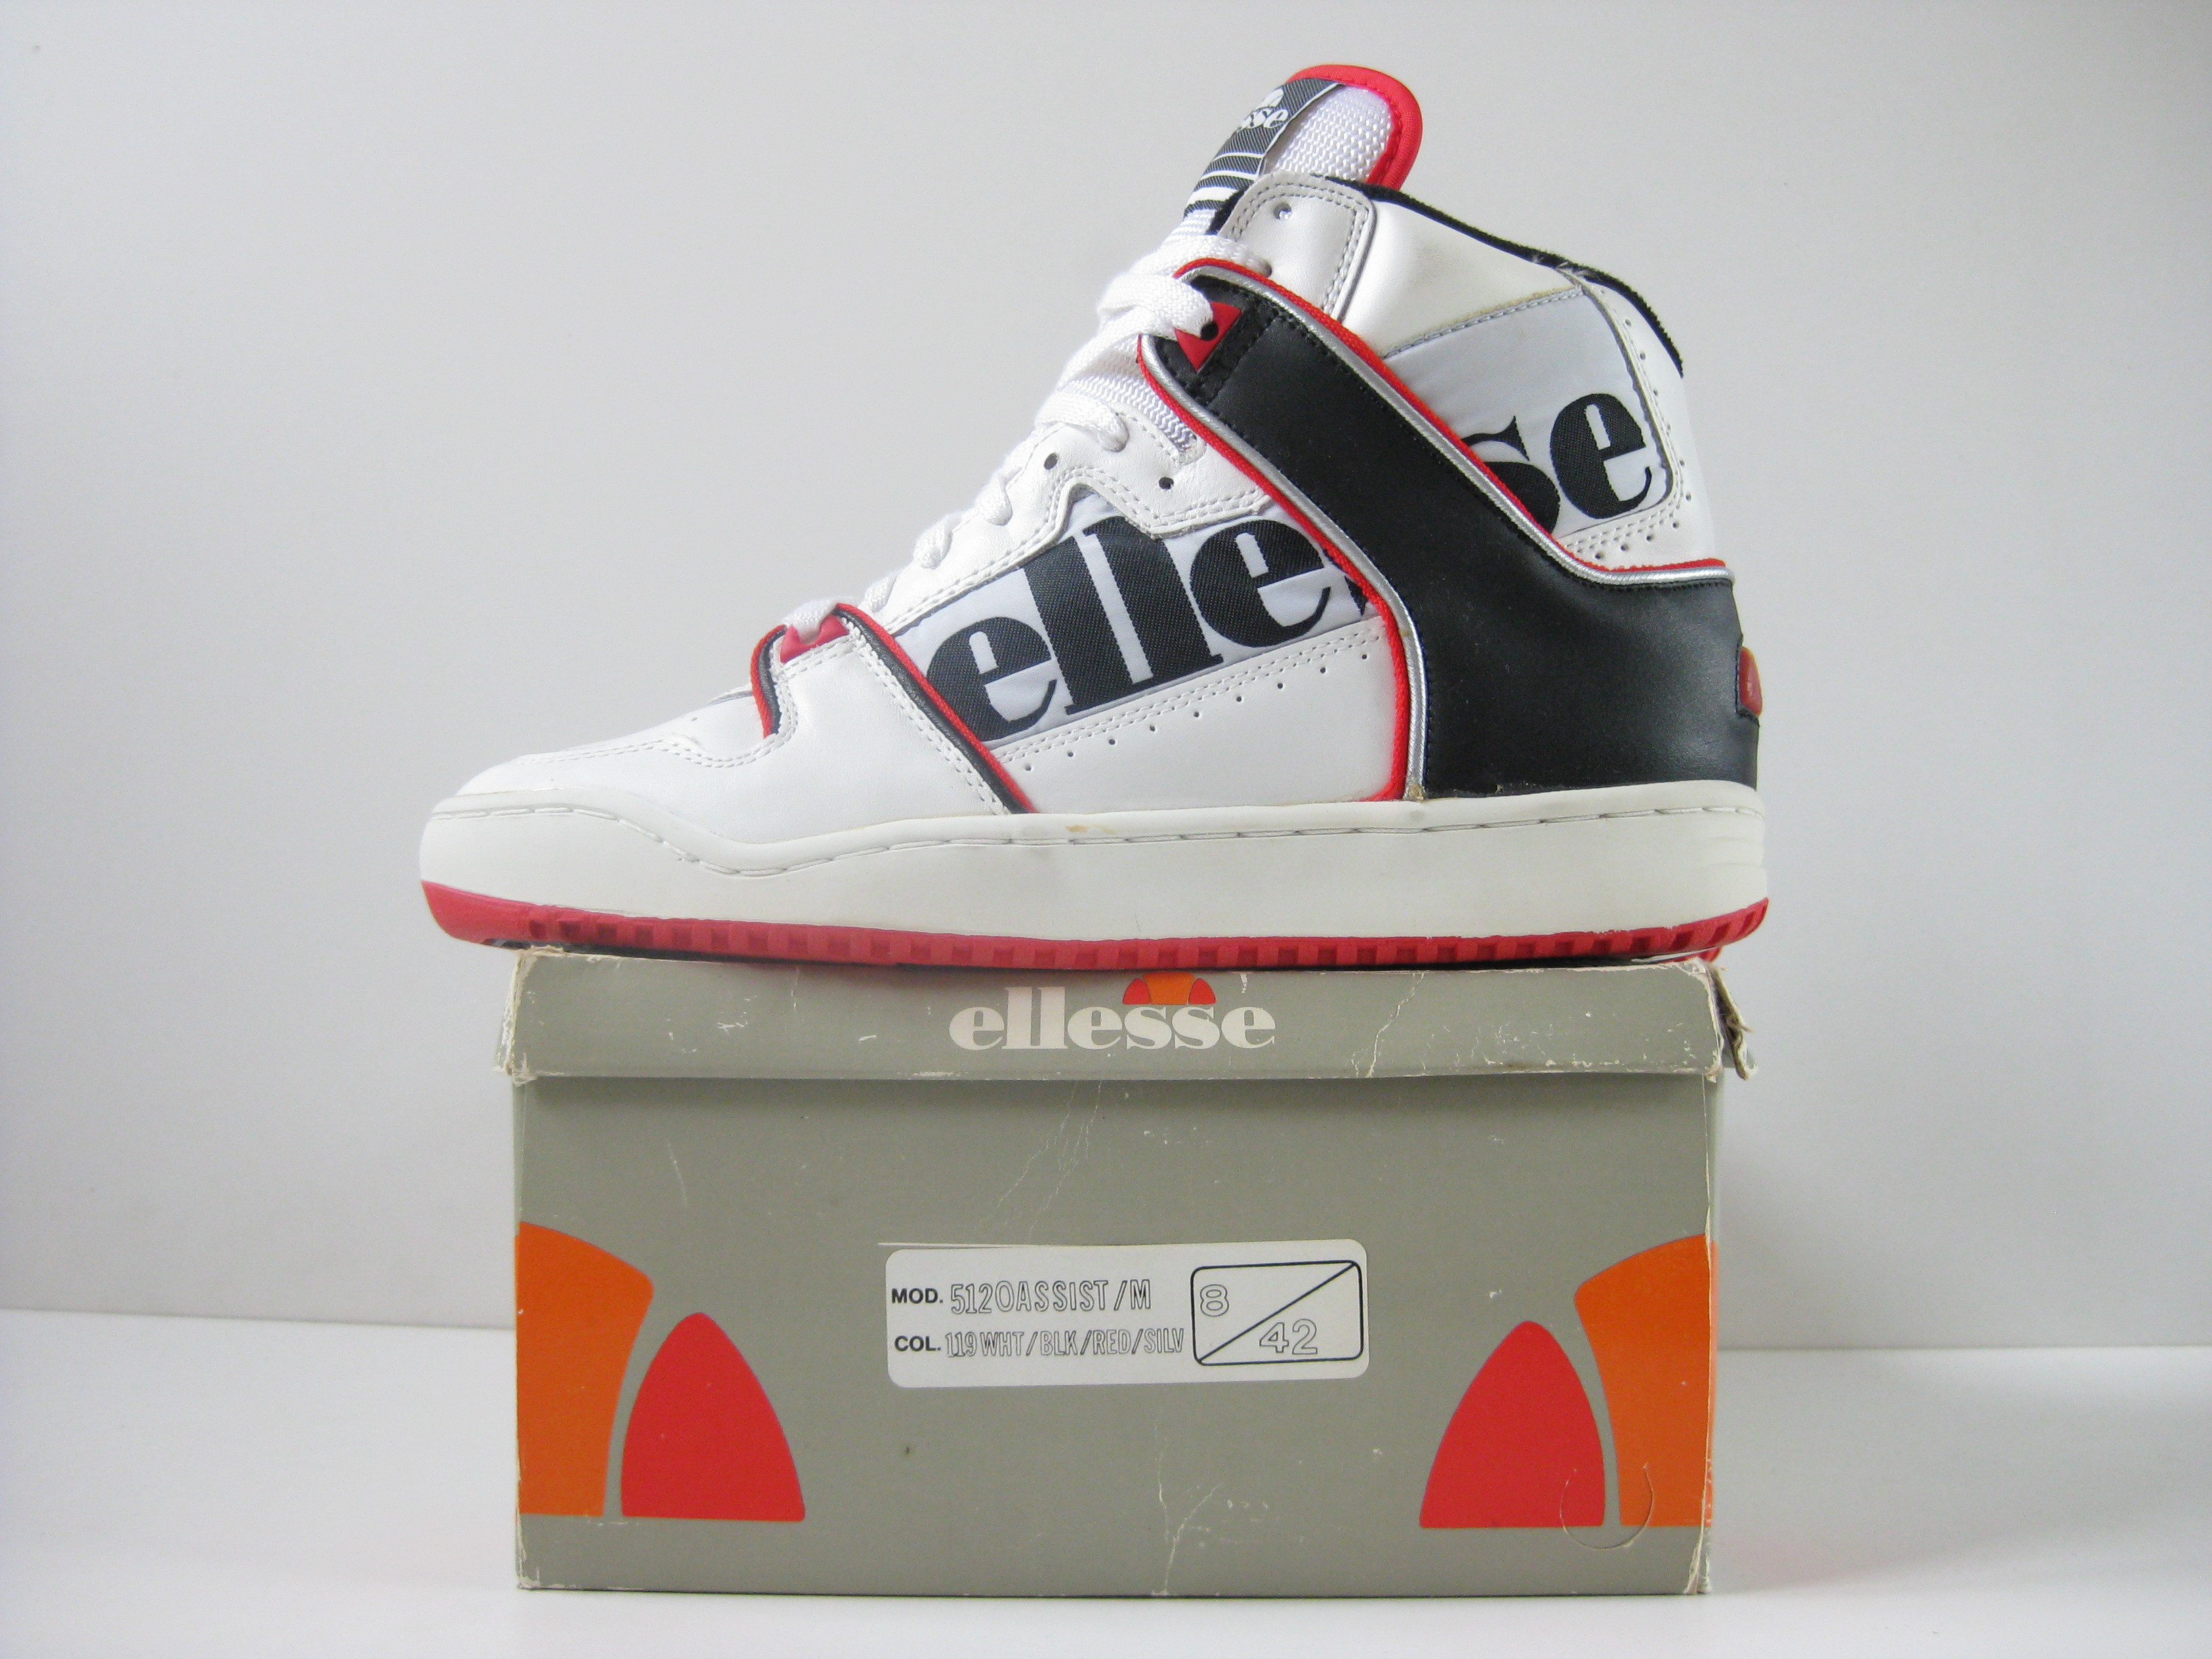 ellesse shoes from the 80s